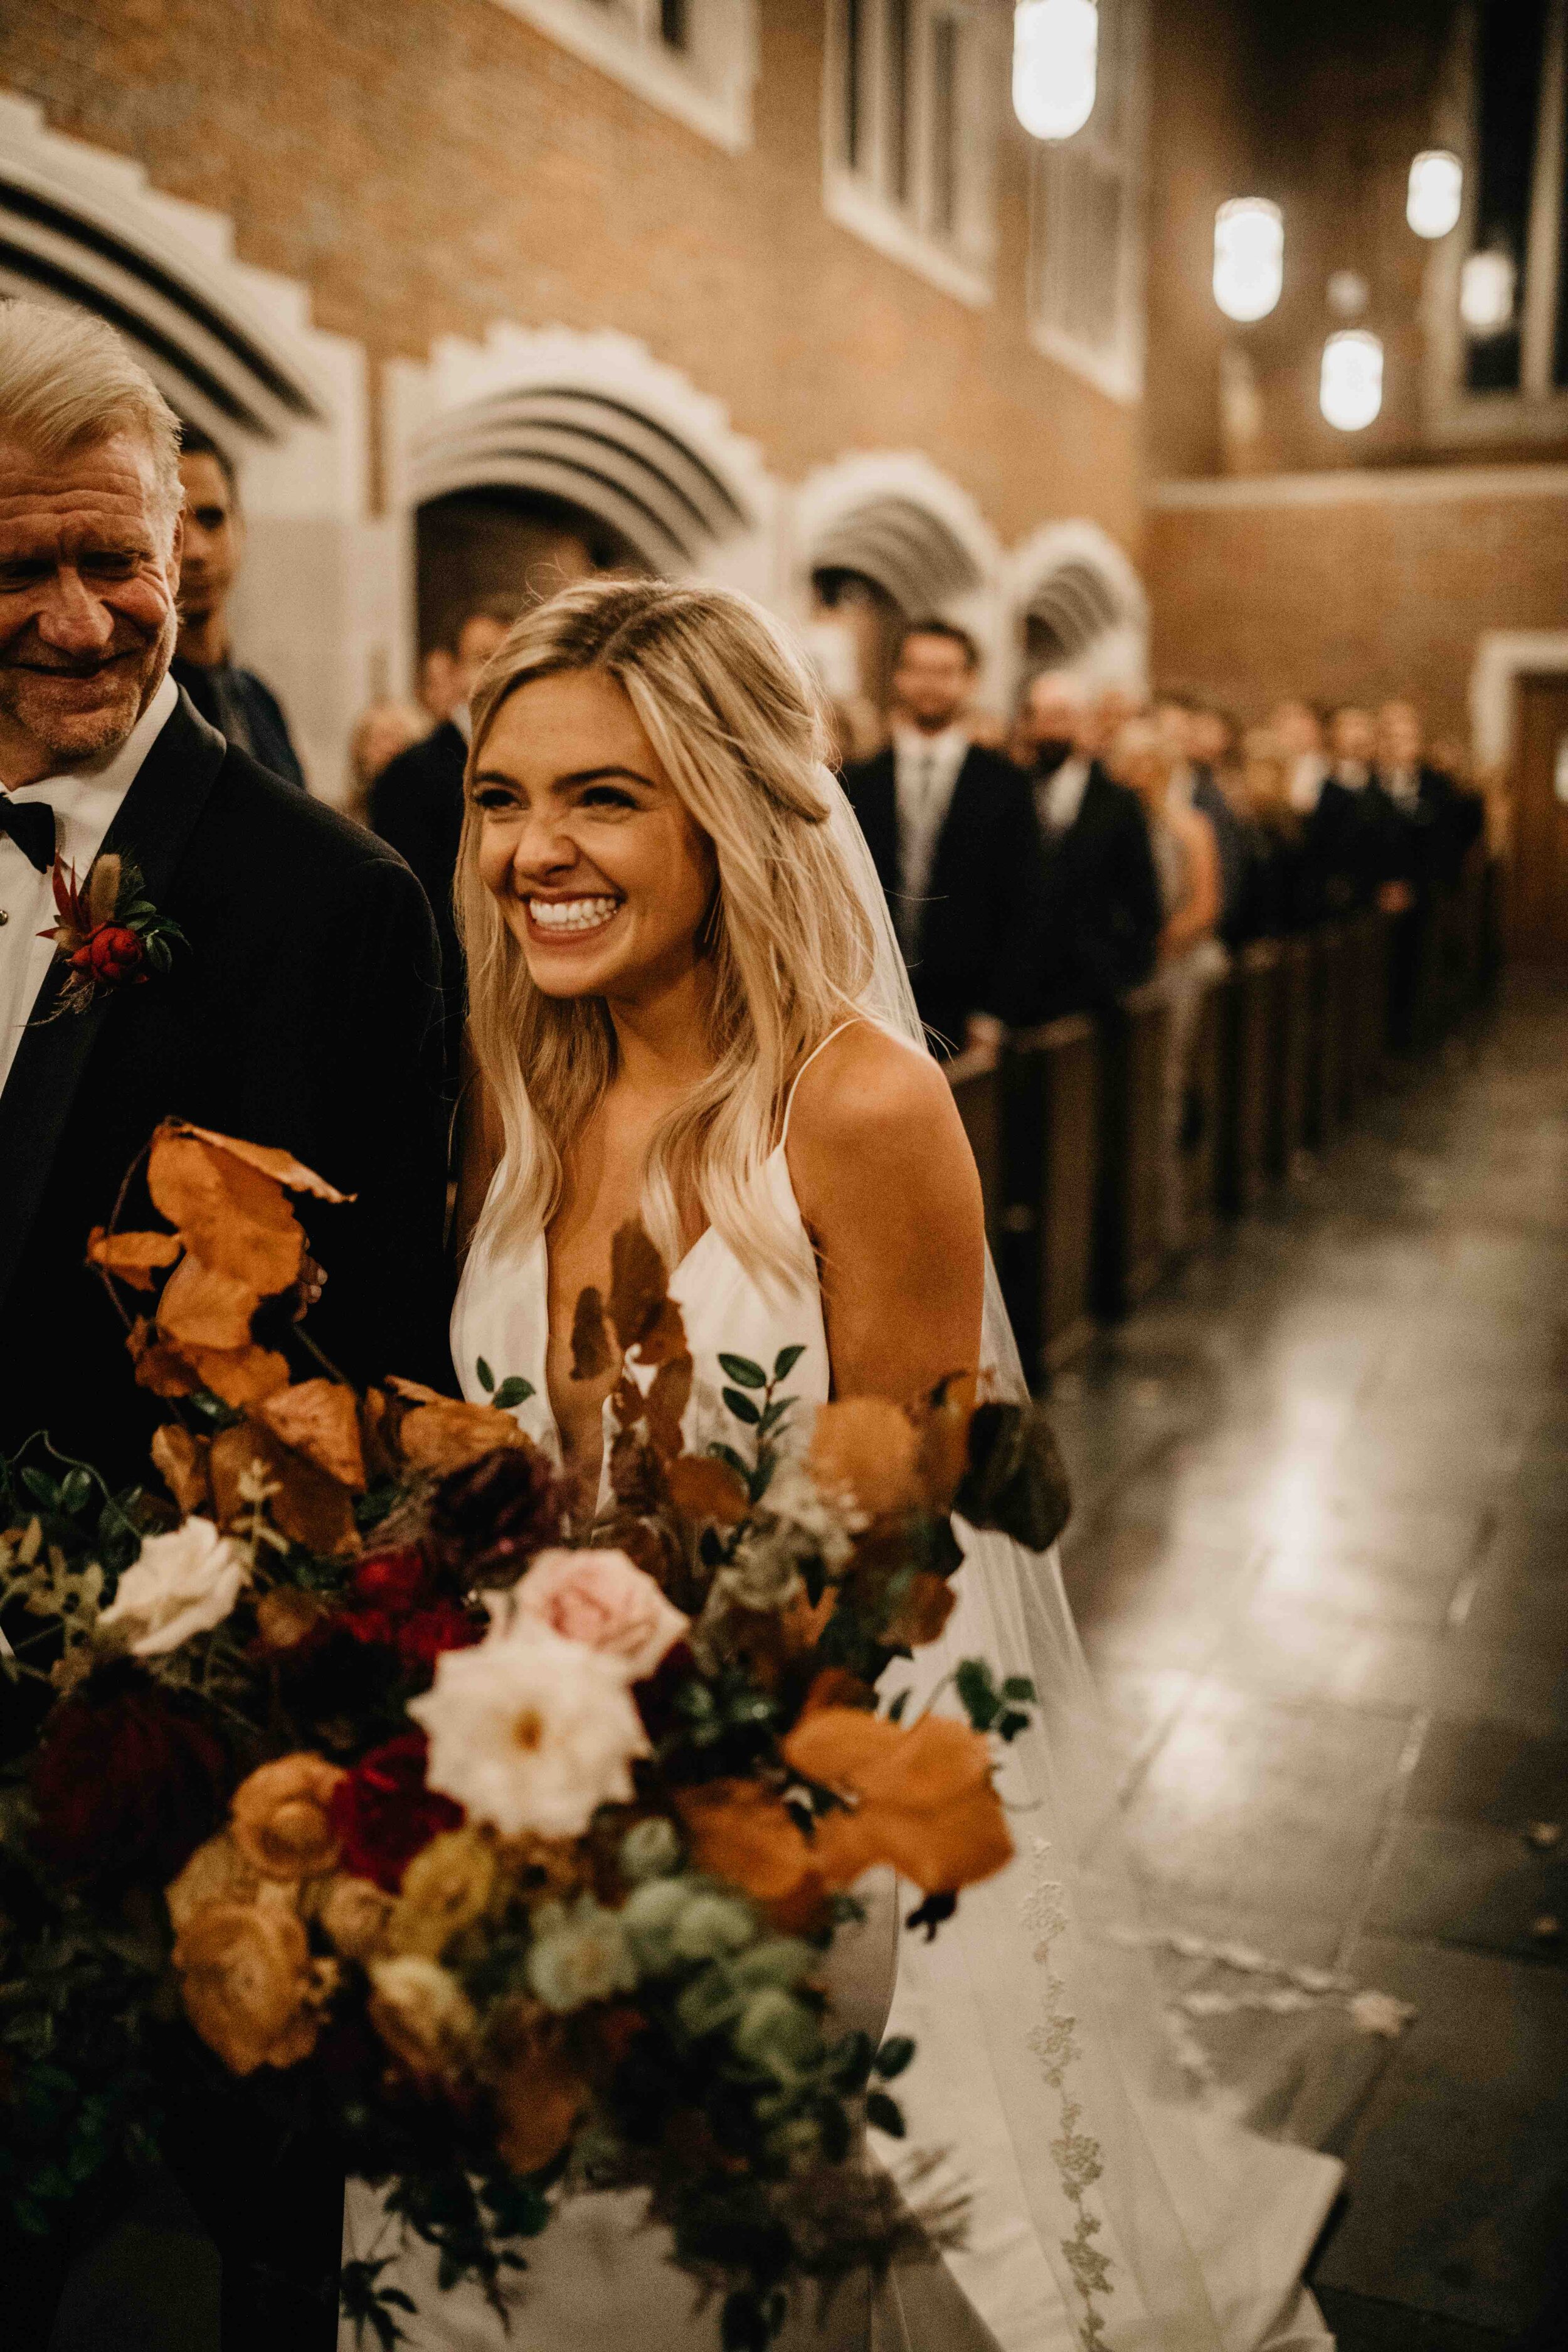 October wedding ceremony in the Wightman Chapel at Scarritt-Bennett. Natural, asymmetrical bride’s bouquet with fall flowers and lush greenery. Nashville luxury wedding florist.